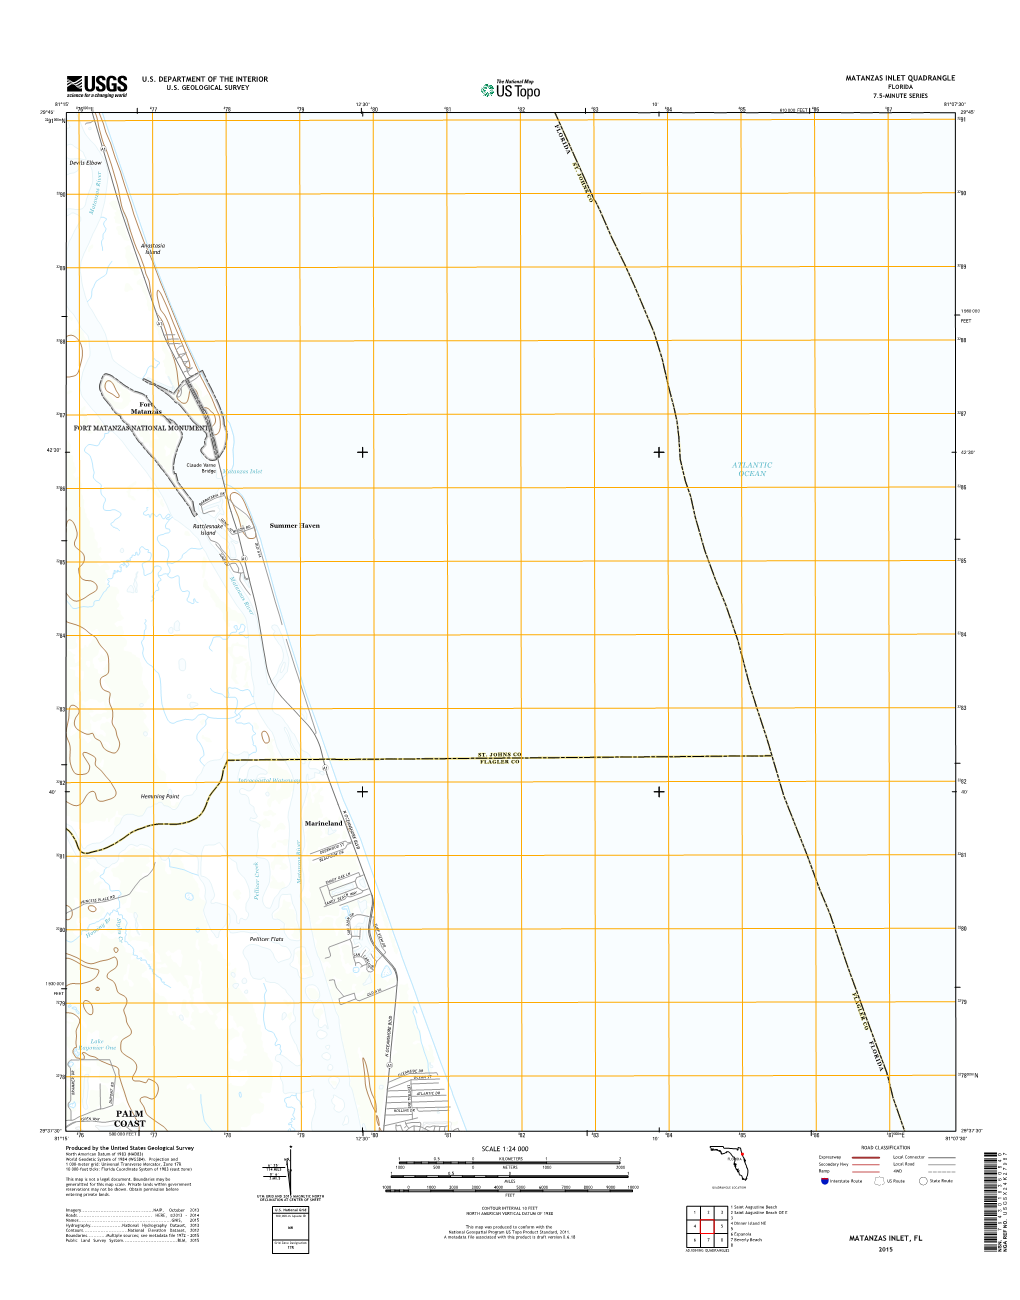 USGS 7.5-Minute Image Map for Matanzas Inlet, Florida